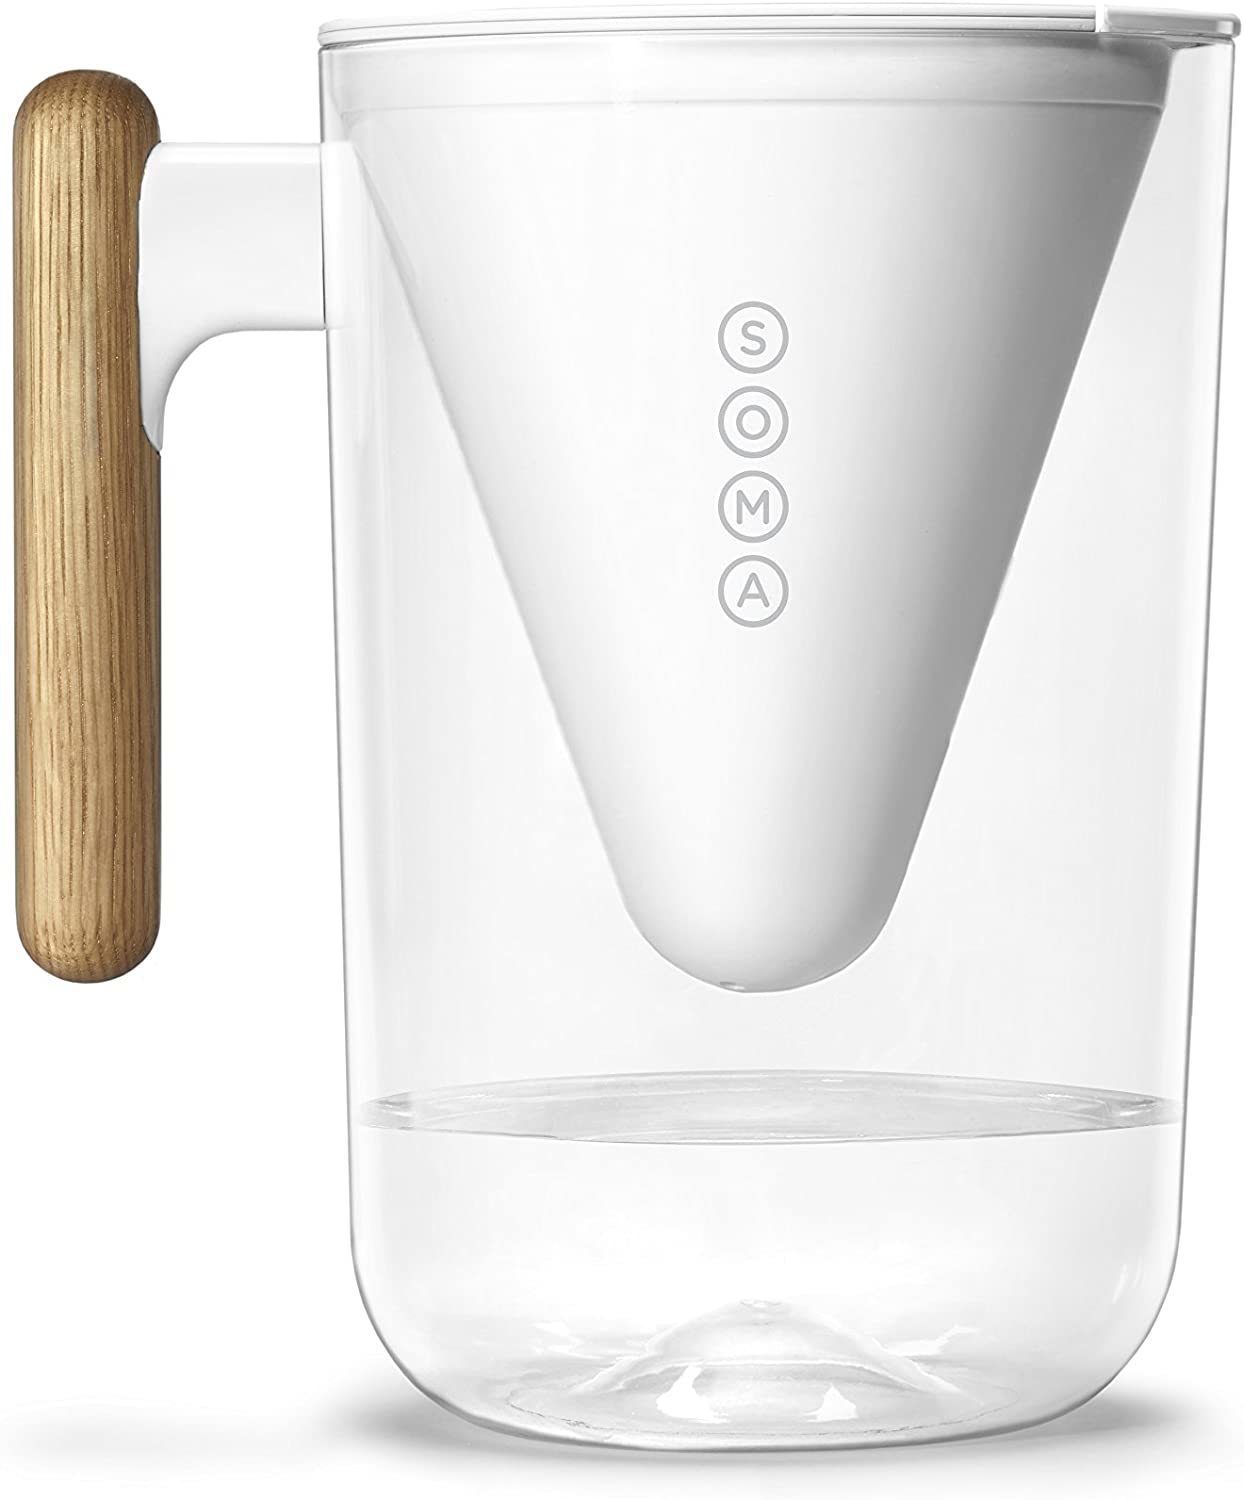 Soma Pitcher Plant-Based Water Filtration